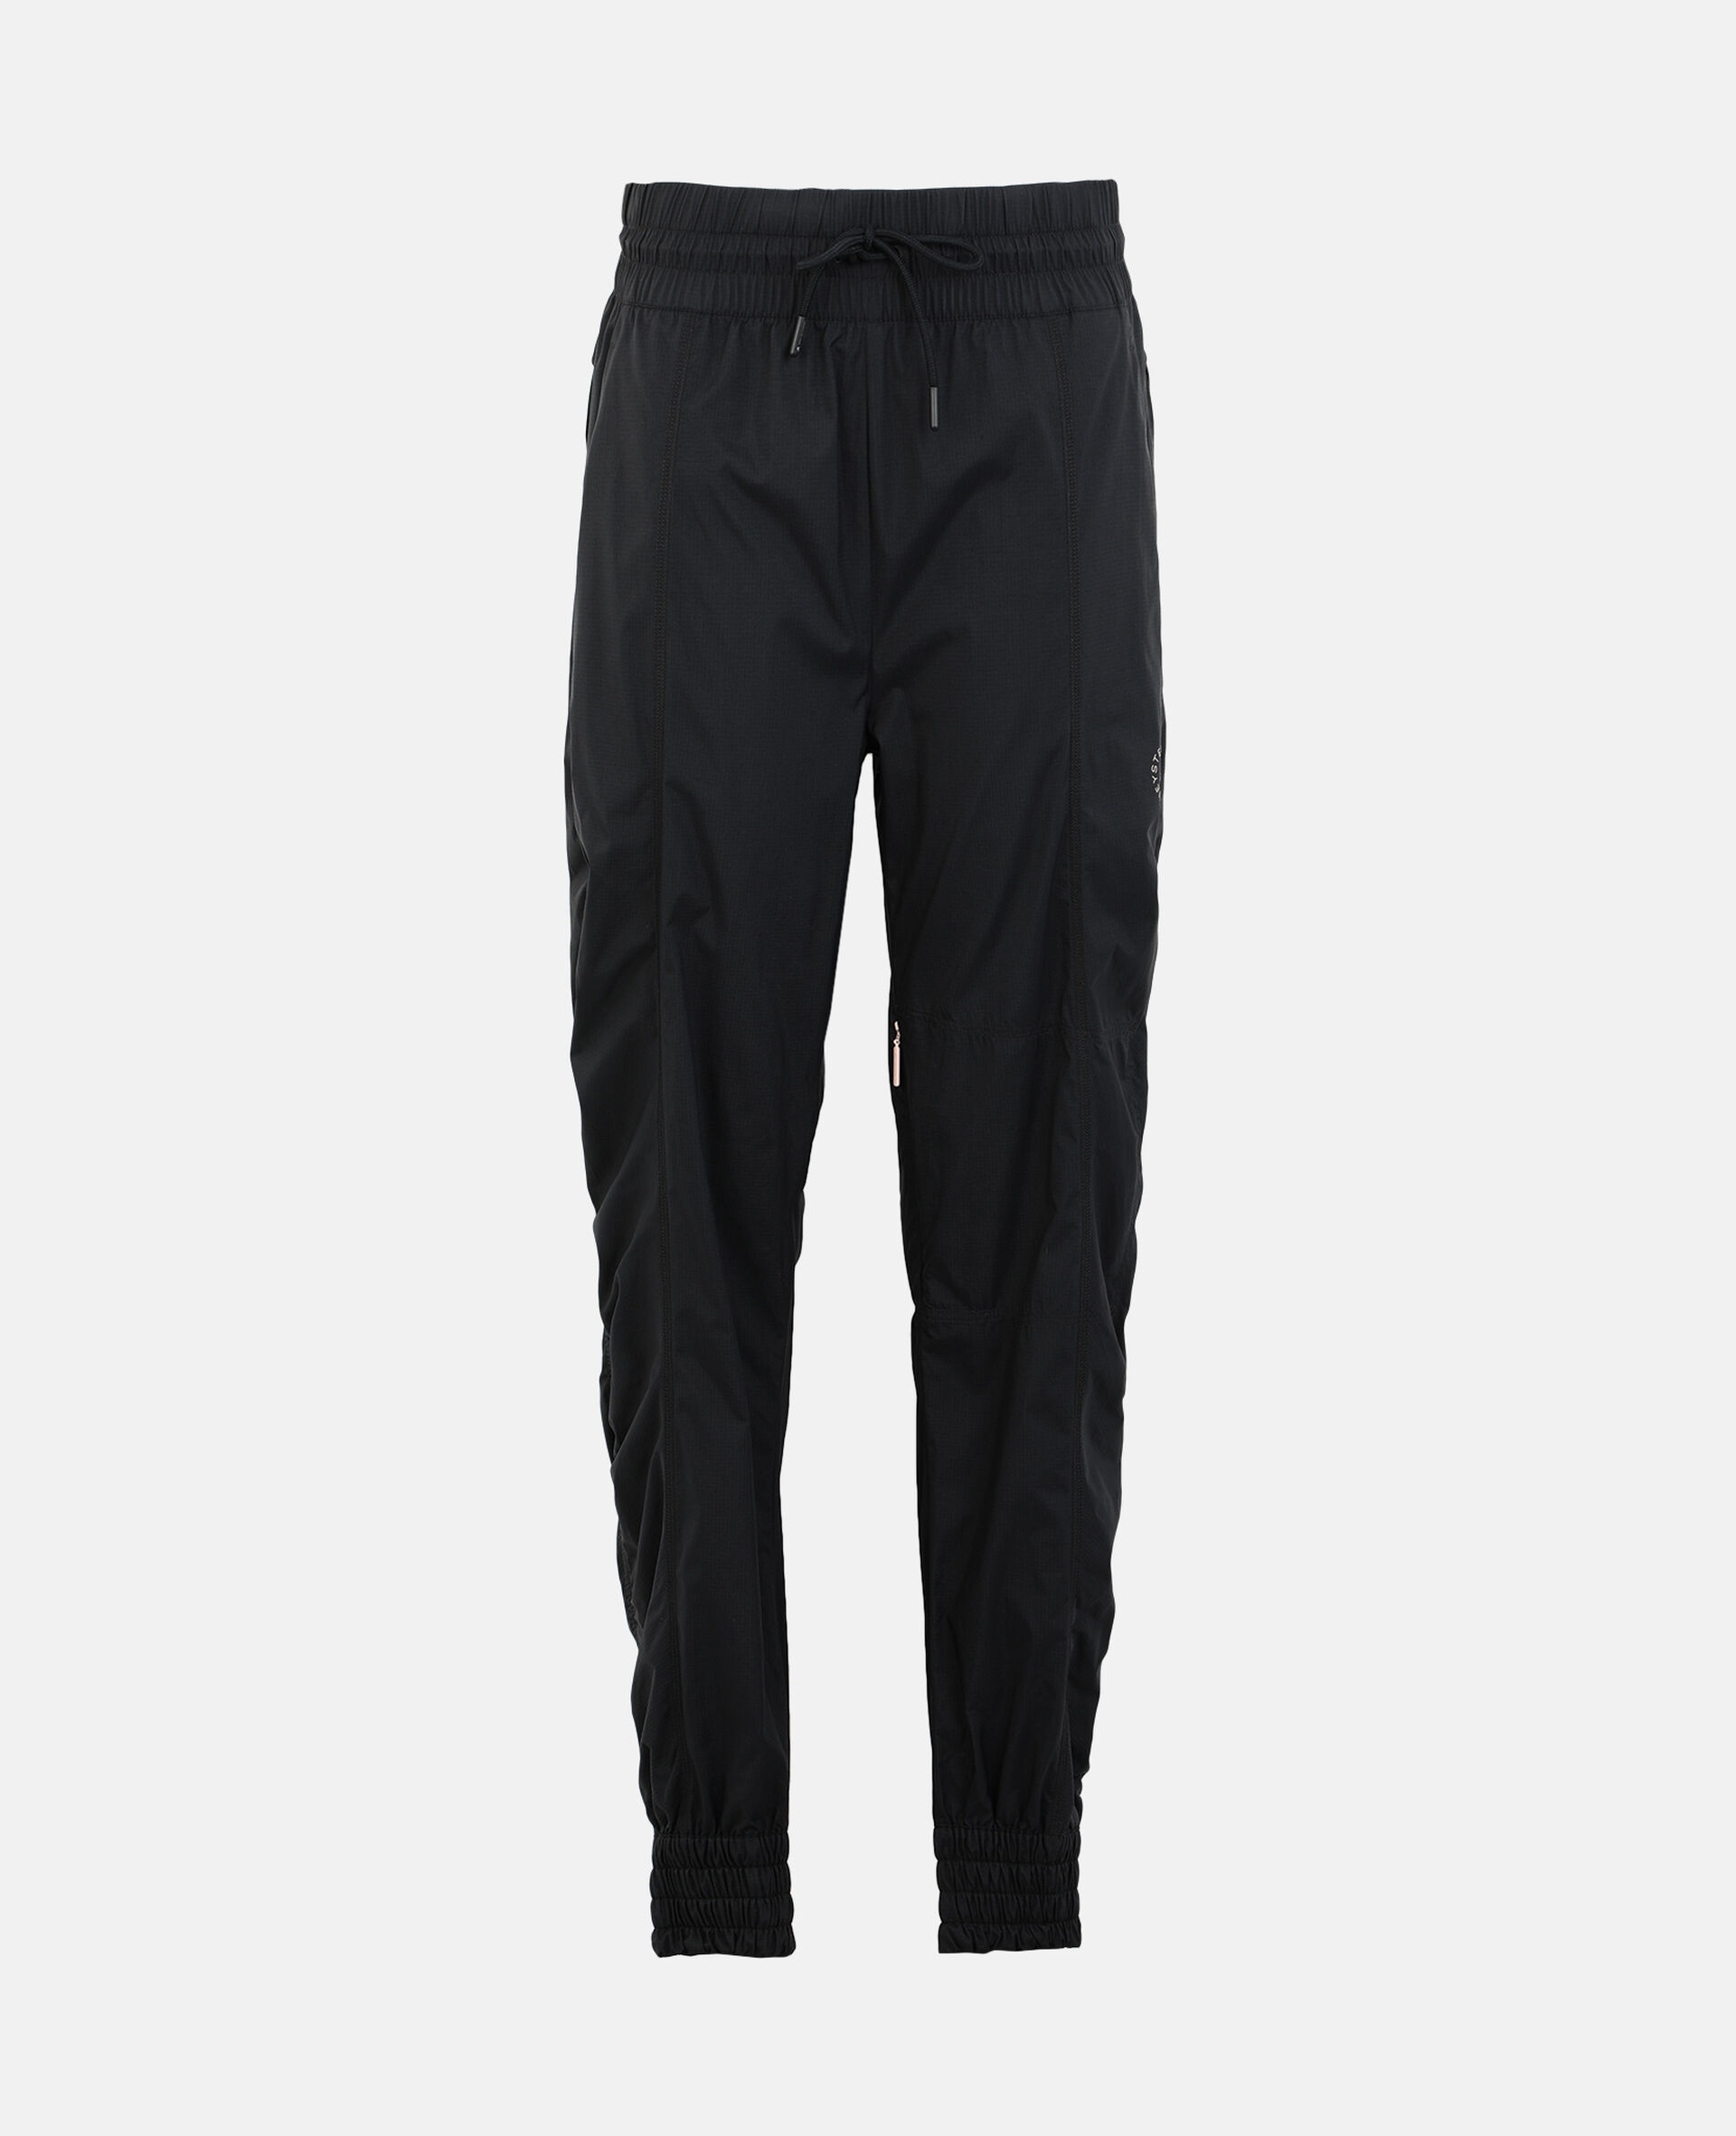 Black Woven Training Trousers-Black-large image number 0